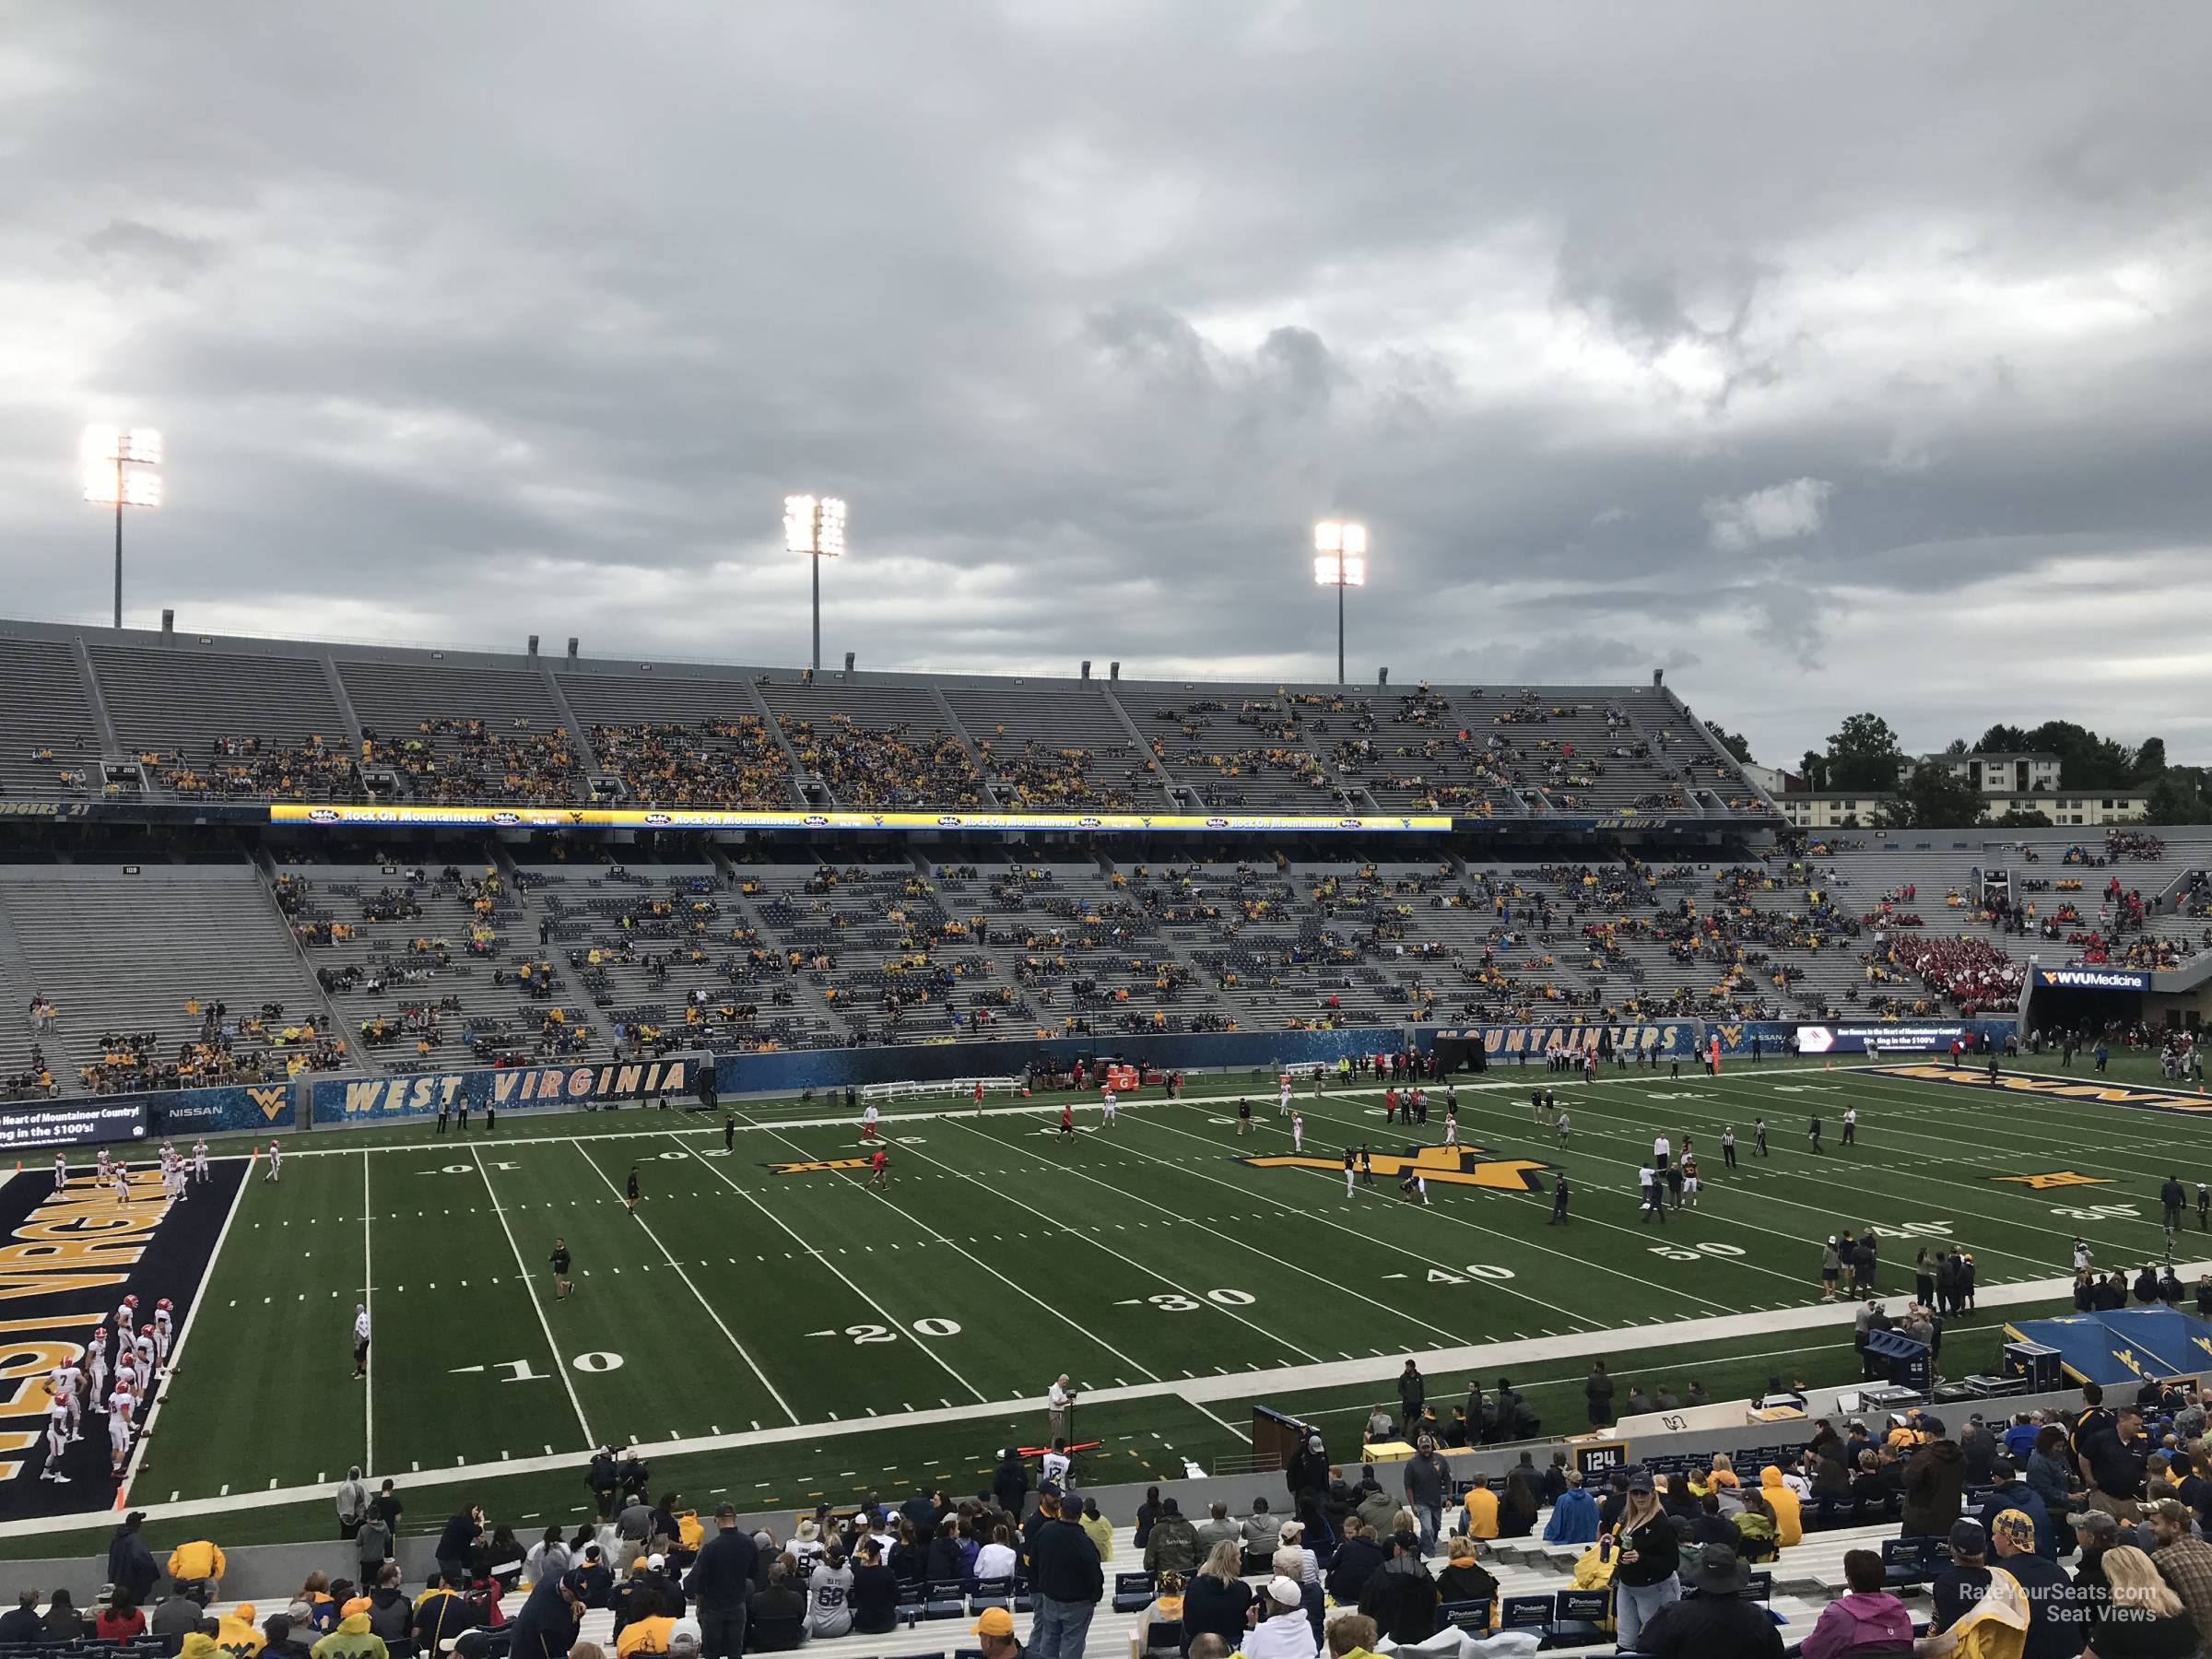 section 123, row 40 seat view  - mountaineer field